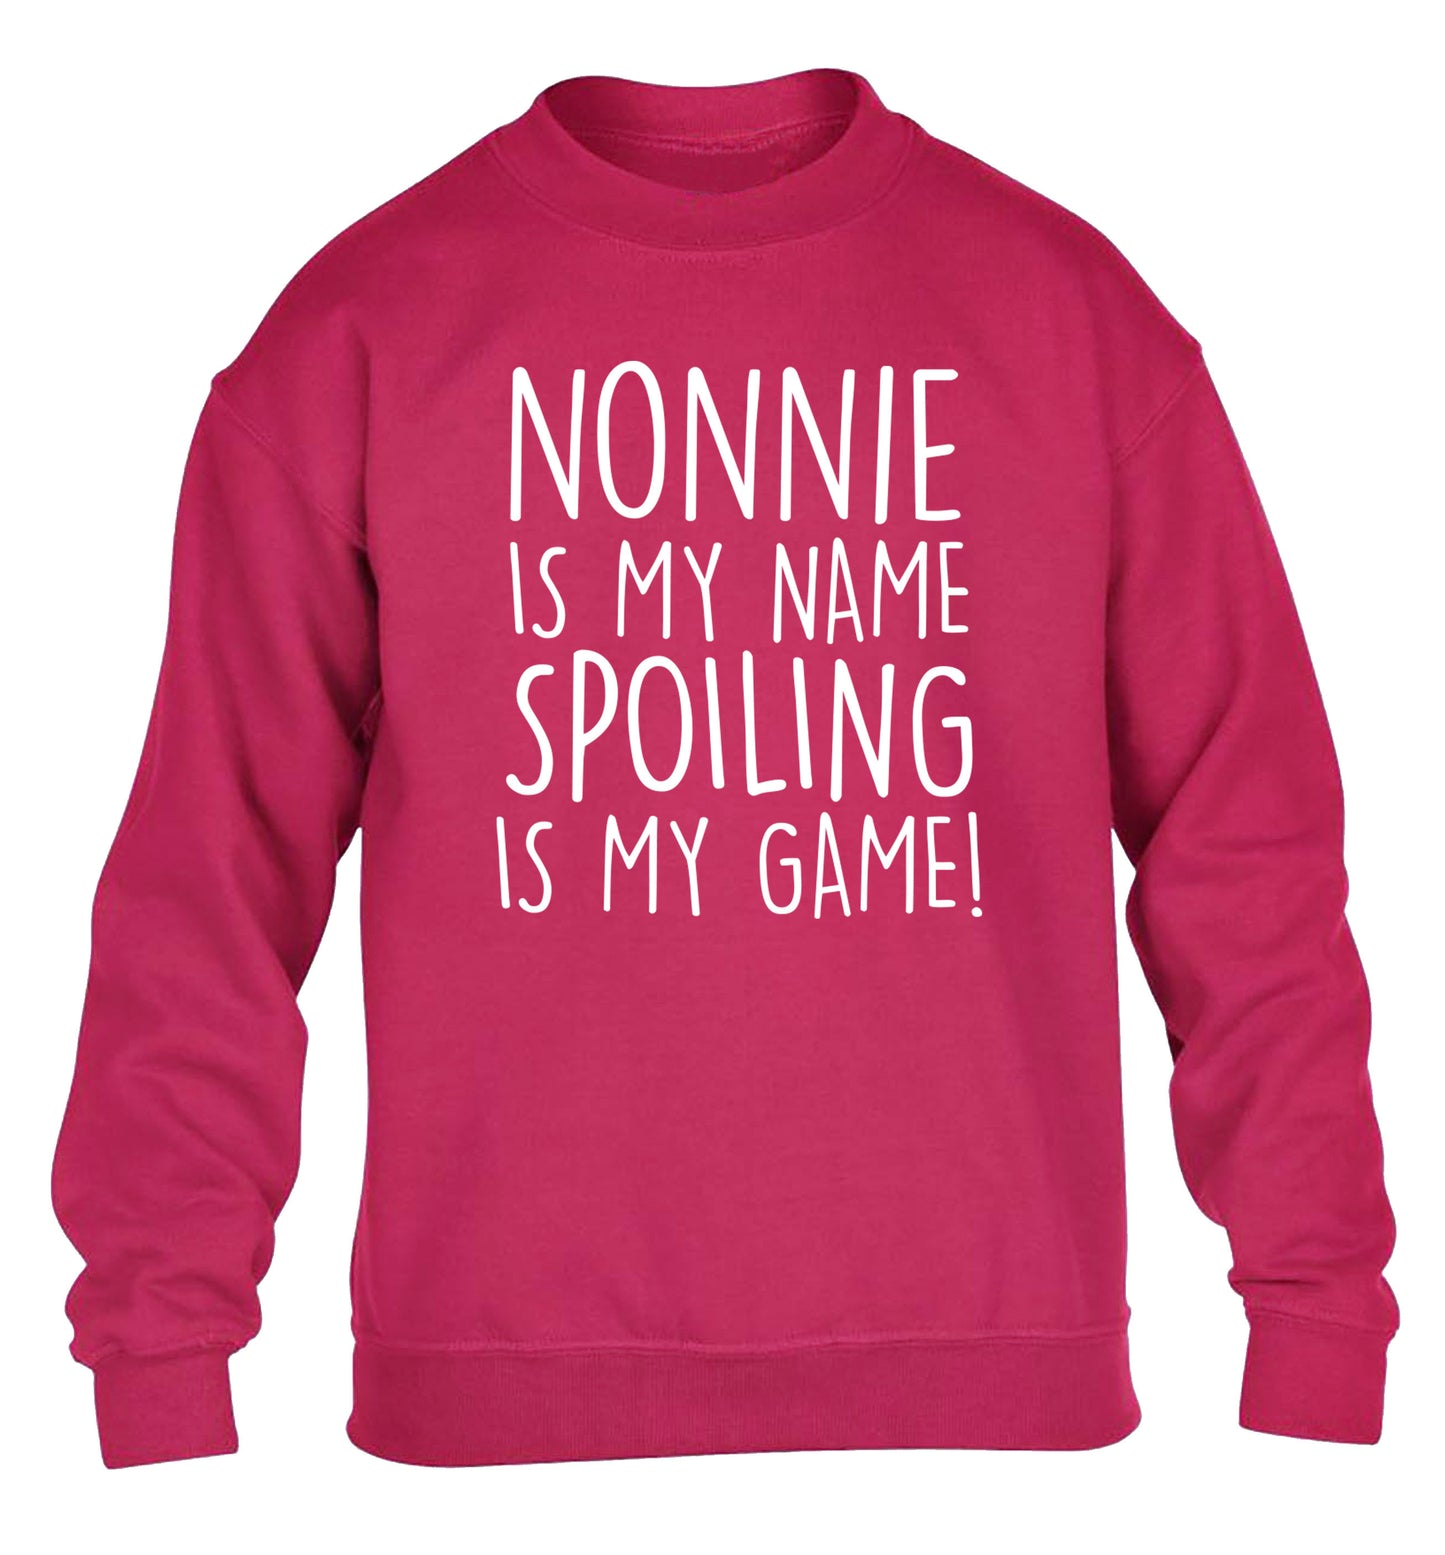 Nonnie is my name, spoiling is my game children's pink sweater 12-14 Years